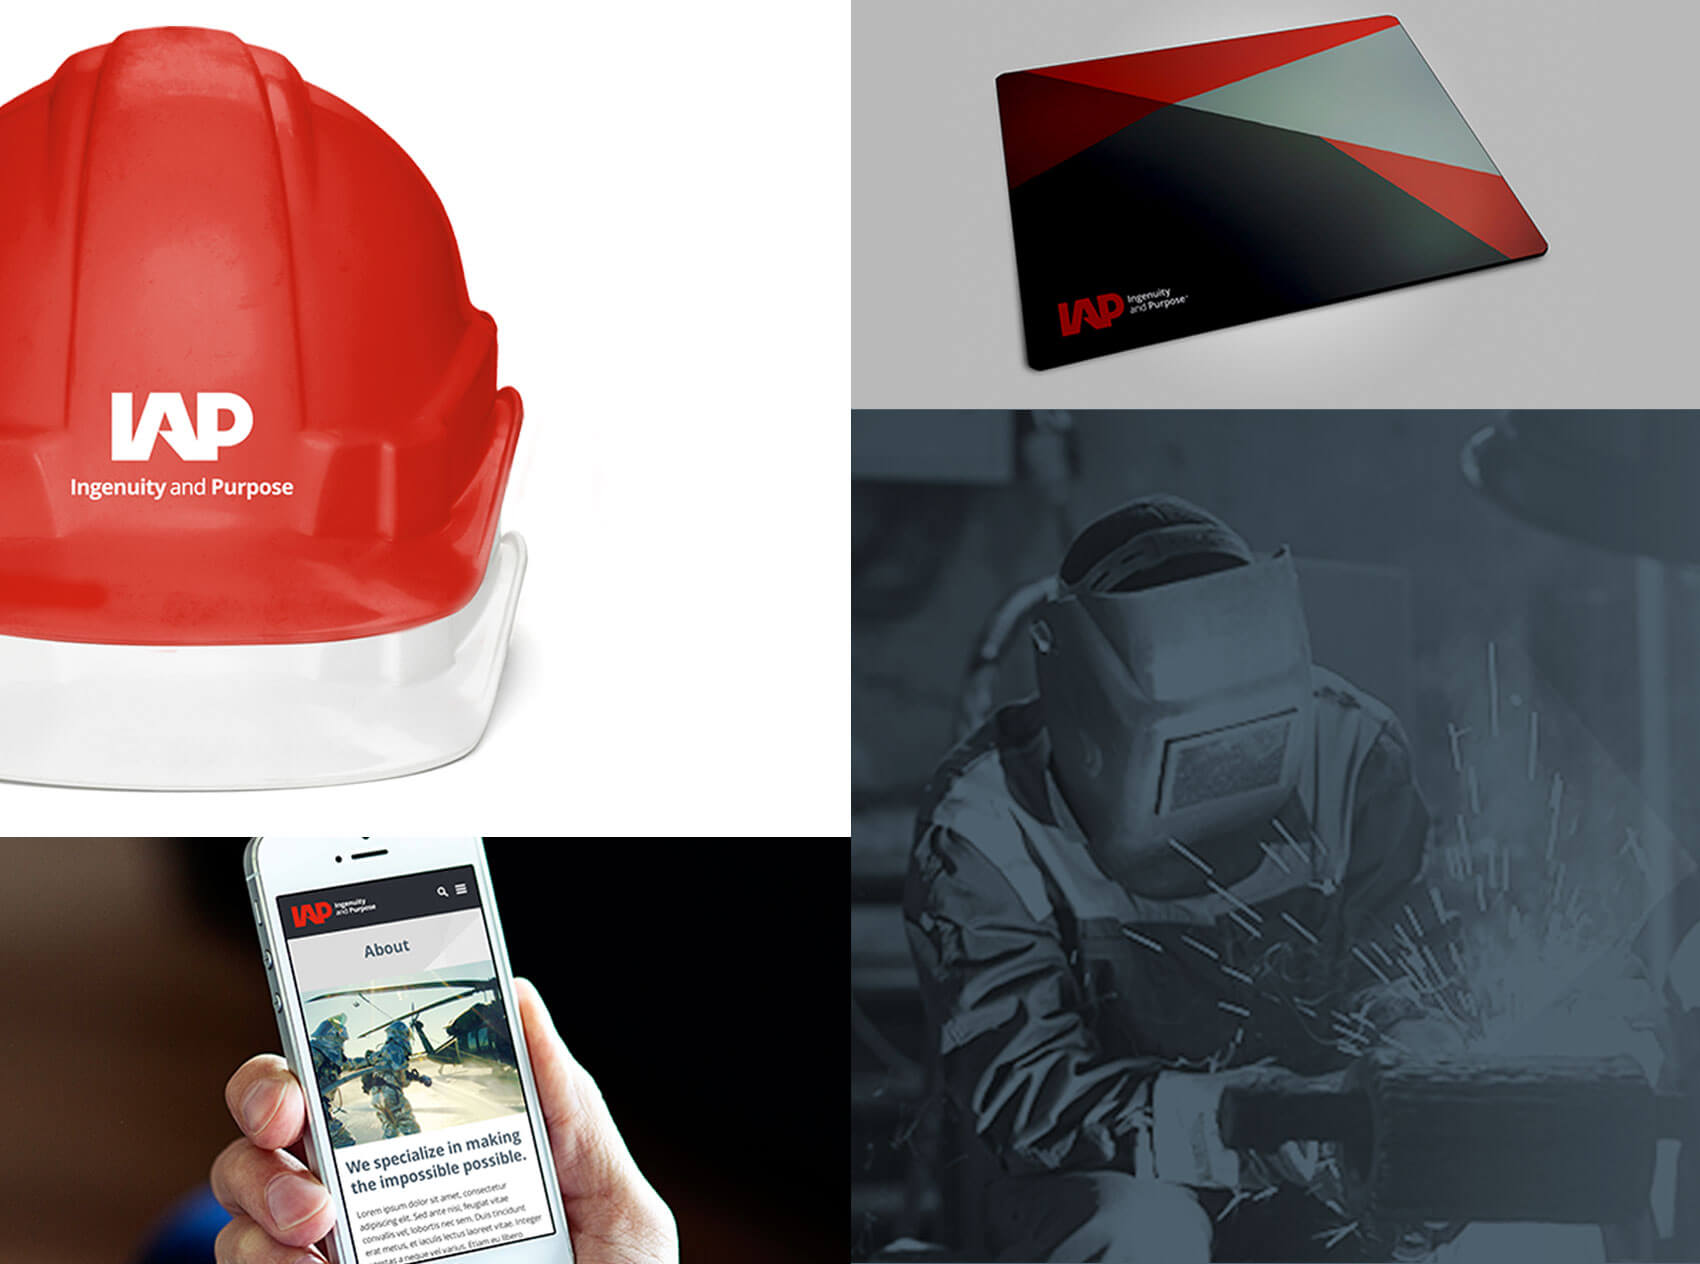 IAP featuring new visual identity in collateral including new website and team member items.